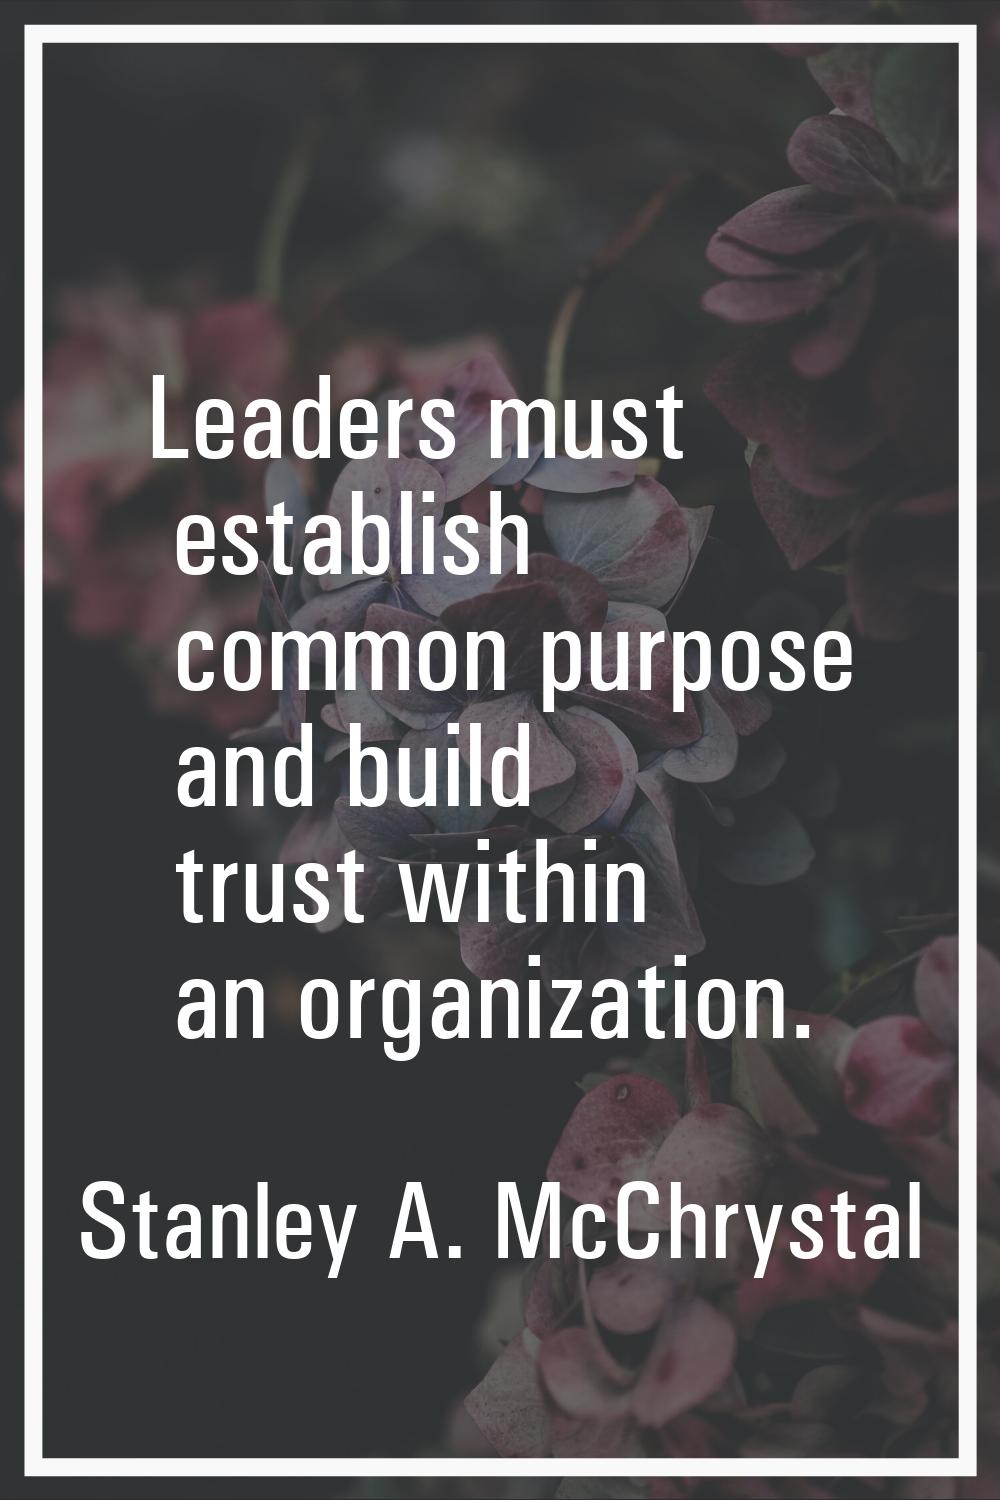 Leaders must establish common purpose and build trust within an organization.